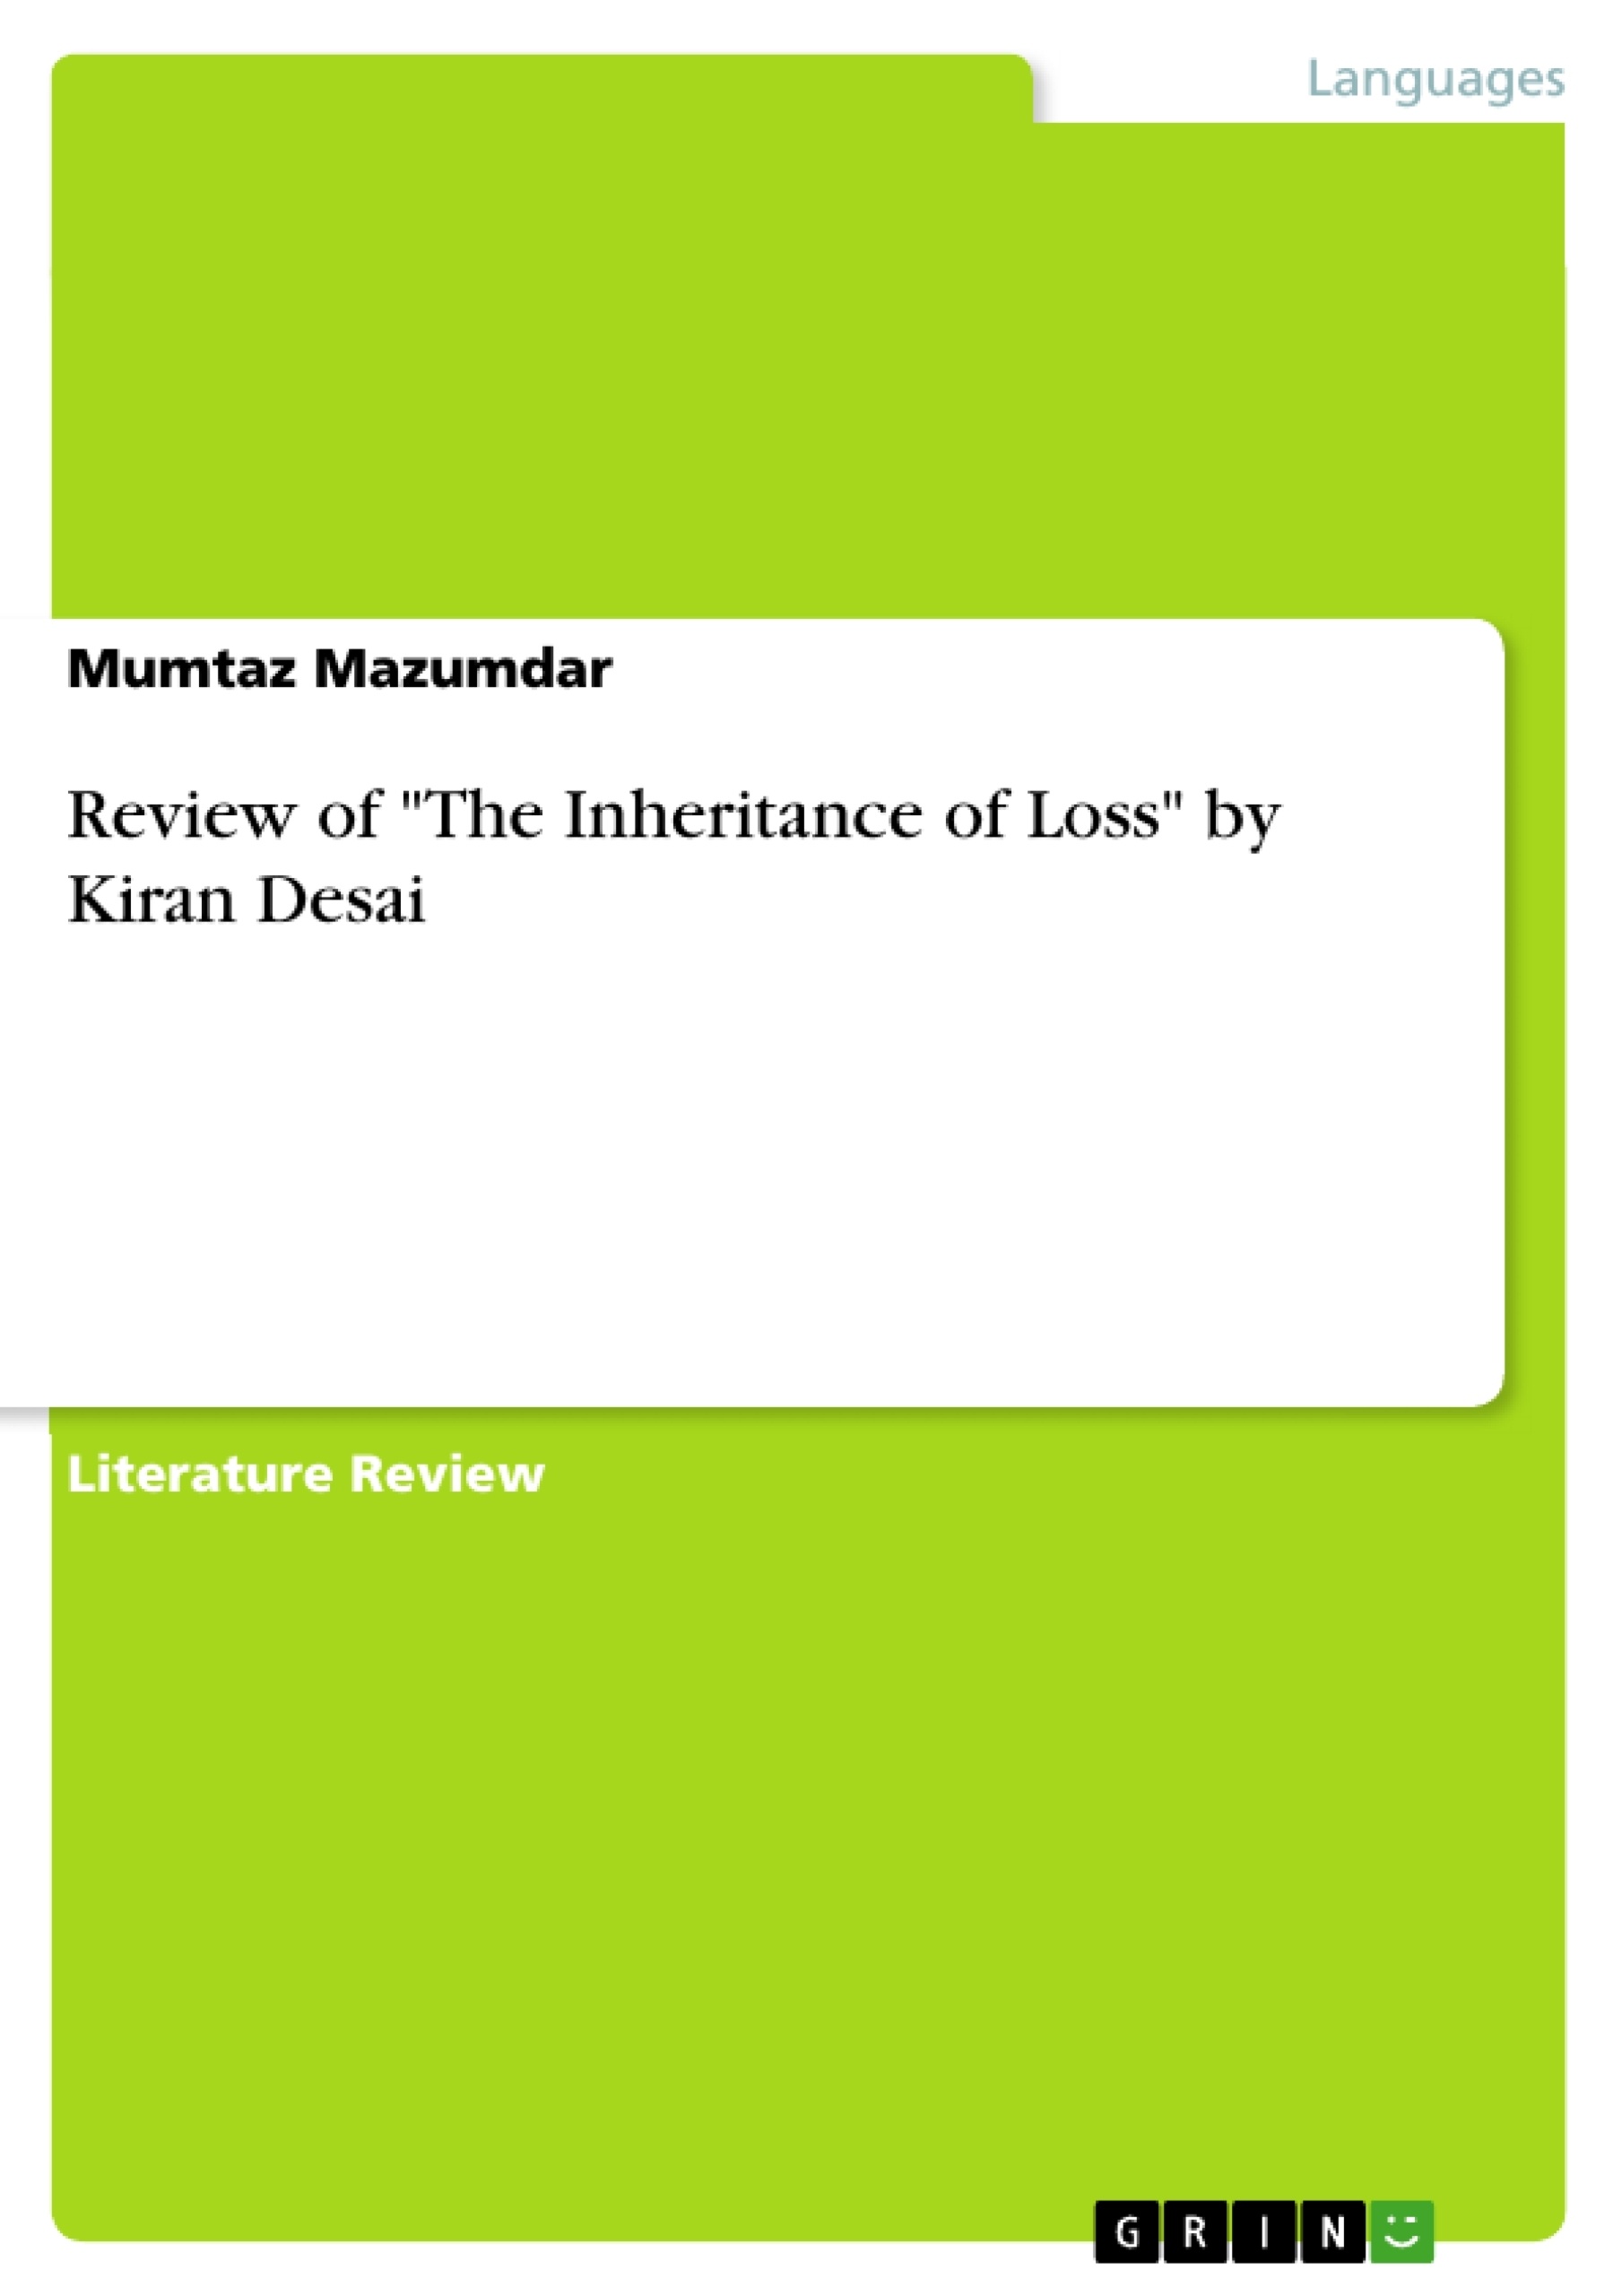 Title: Review of "The Inheritance of Loss" by Kiran Desai